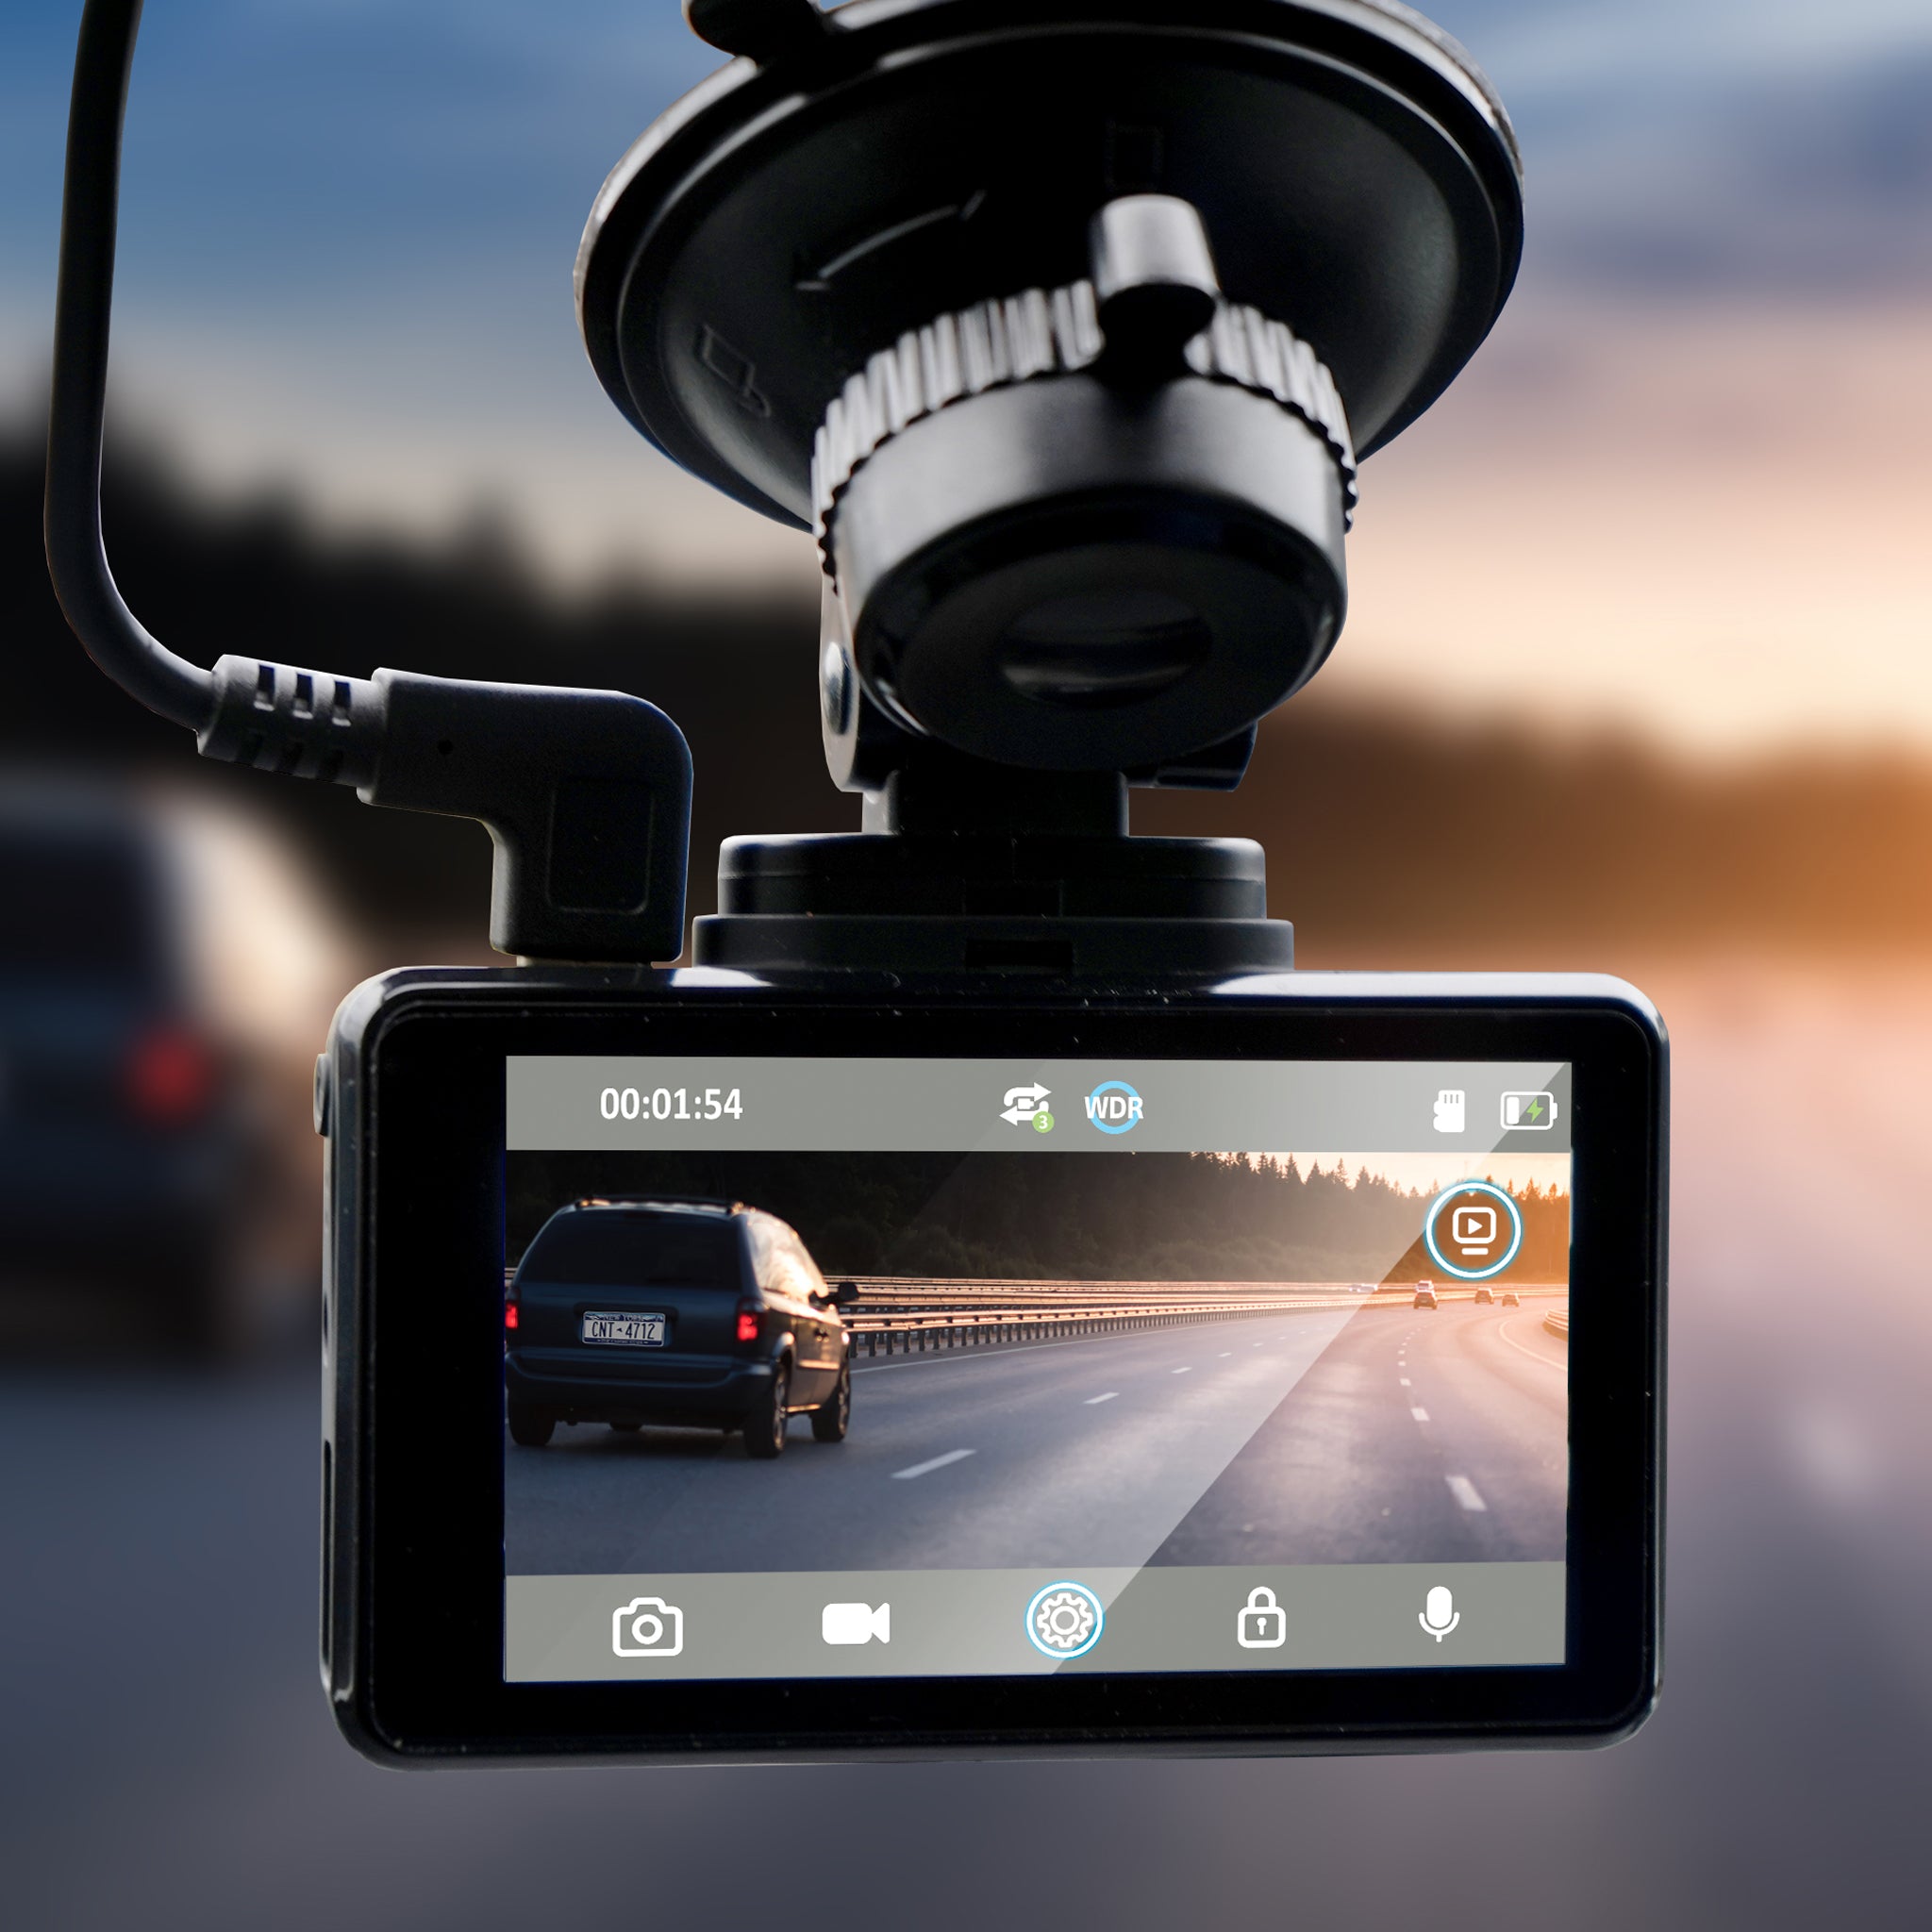 Car and Driver Eye2 Pro dash cam review: From worst to almost first